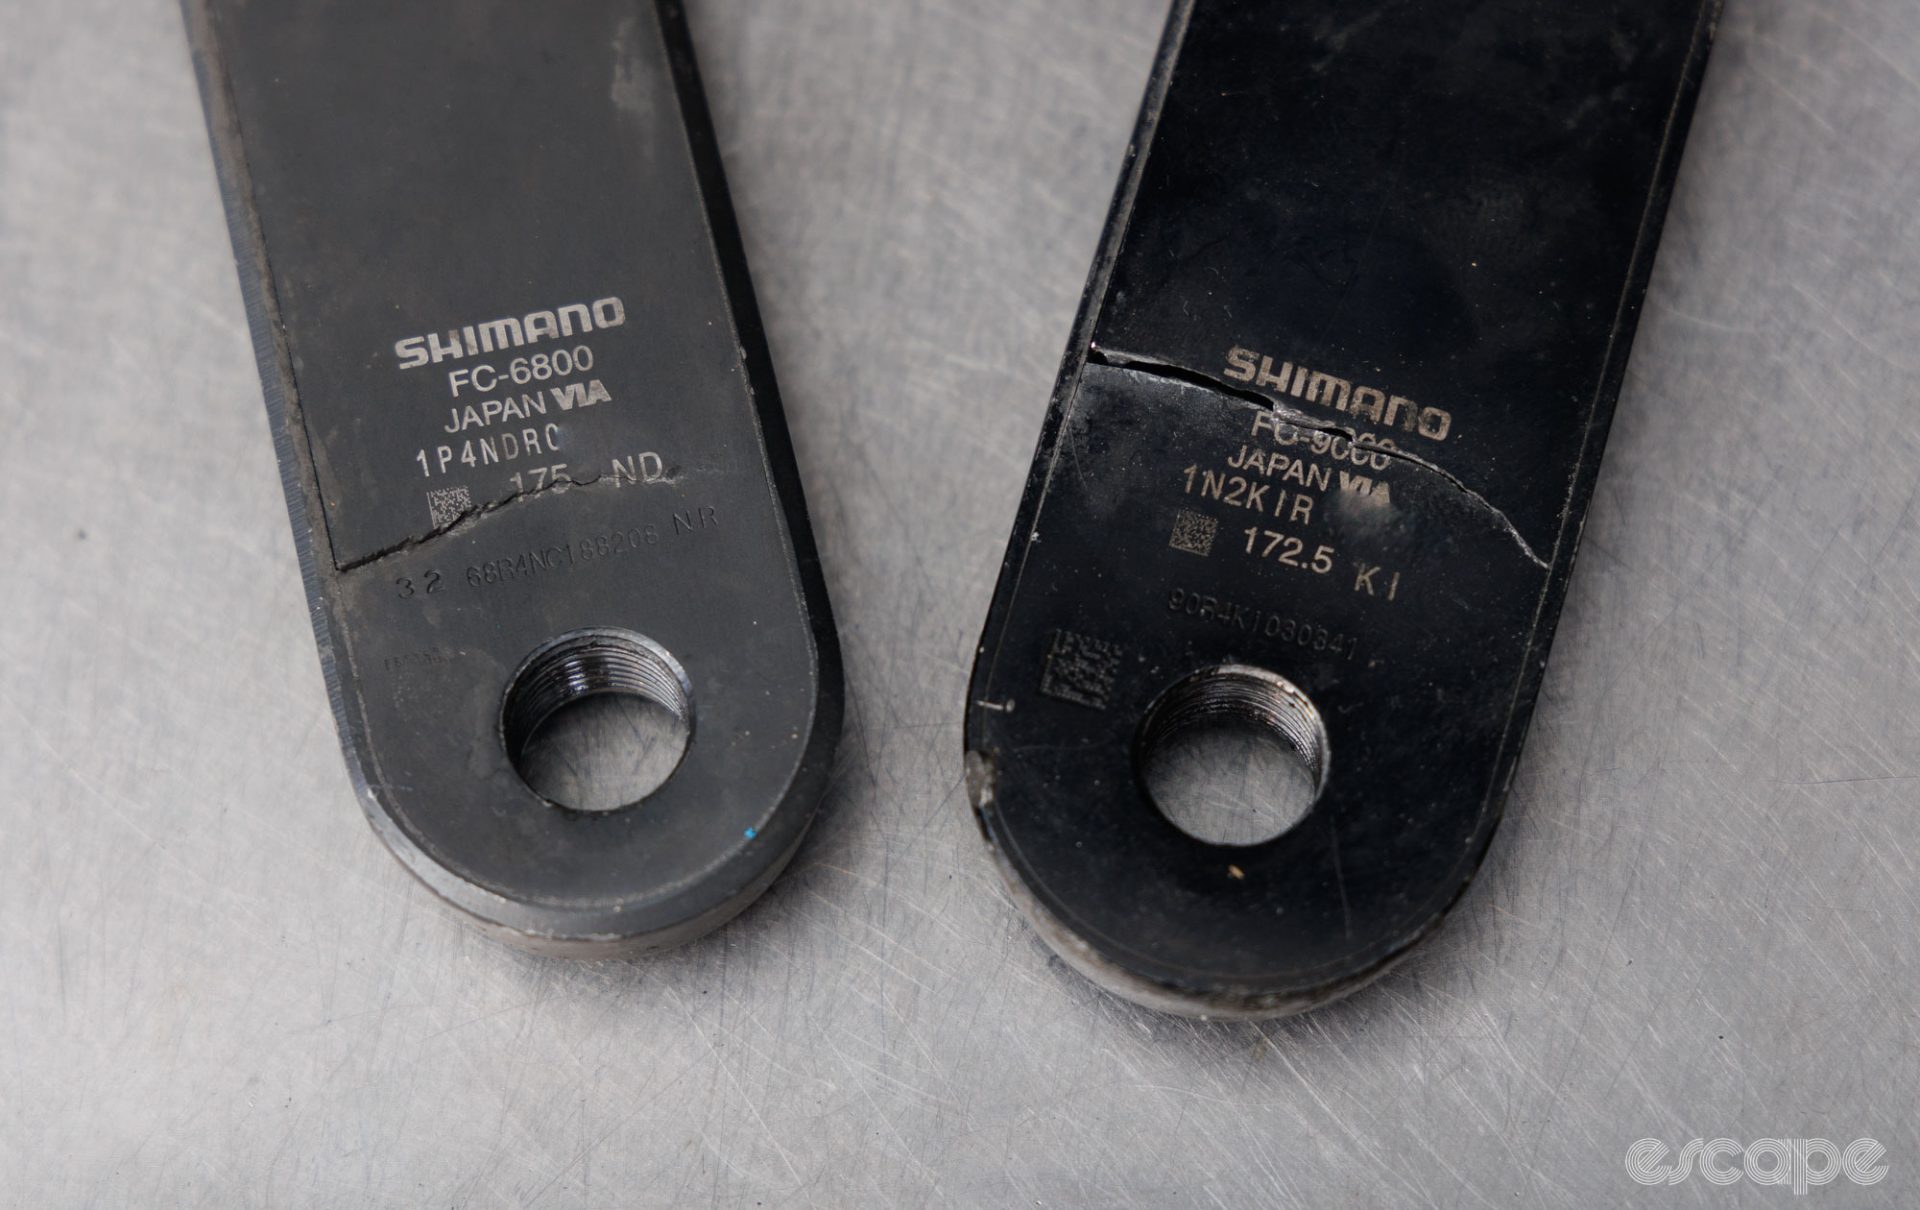 Two broken Shimano crankarms, shown from the inward facing side of the arms. Large, noticeable cracks spread across the arm in a perpendicular axis, and cross right through the manufacturing model and serial code stamp above the hole for the pedal spindle.